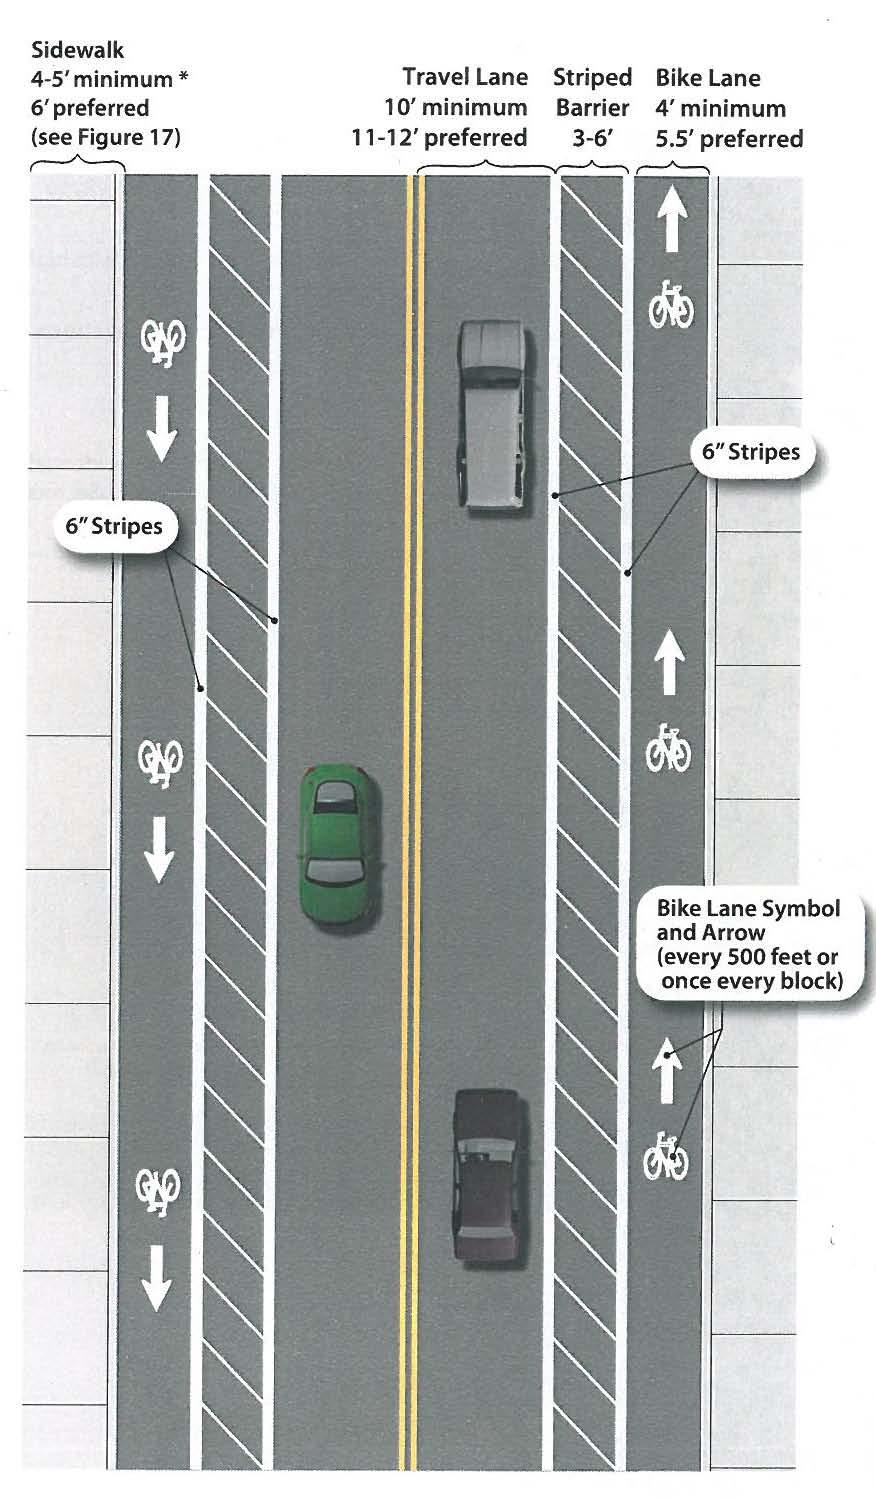 Conceptual Depiction of Buffered Bicycle Lanes Source: Reno Sparks Bicycle & Pedestrian Plan Design Best Practices, October 2011 Recommendations for Existing Bicycle Lane Adjacent to High Speed